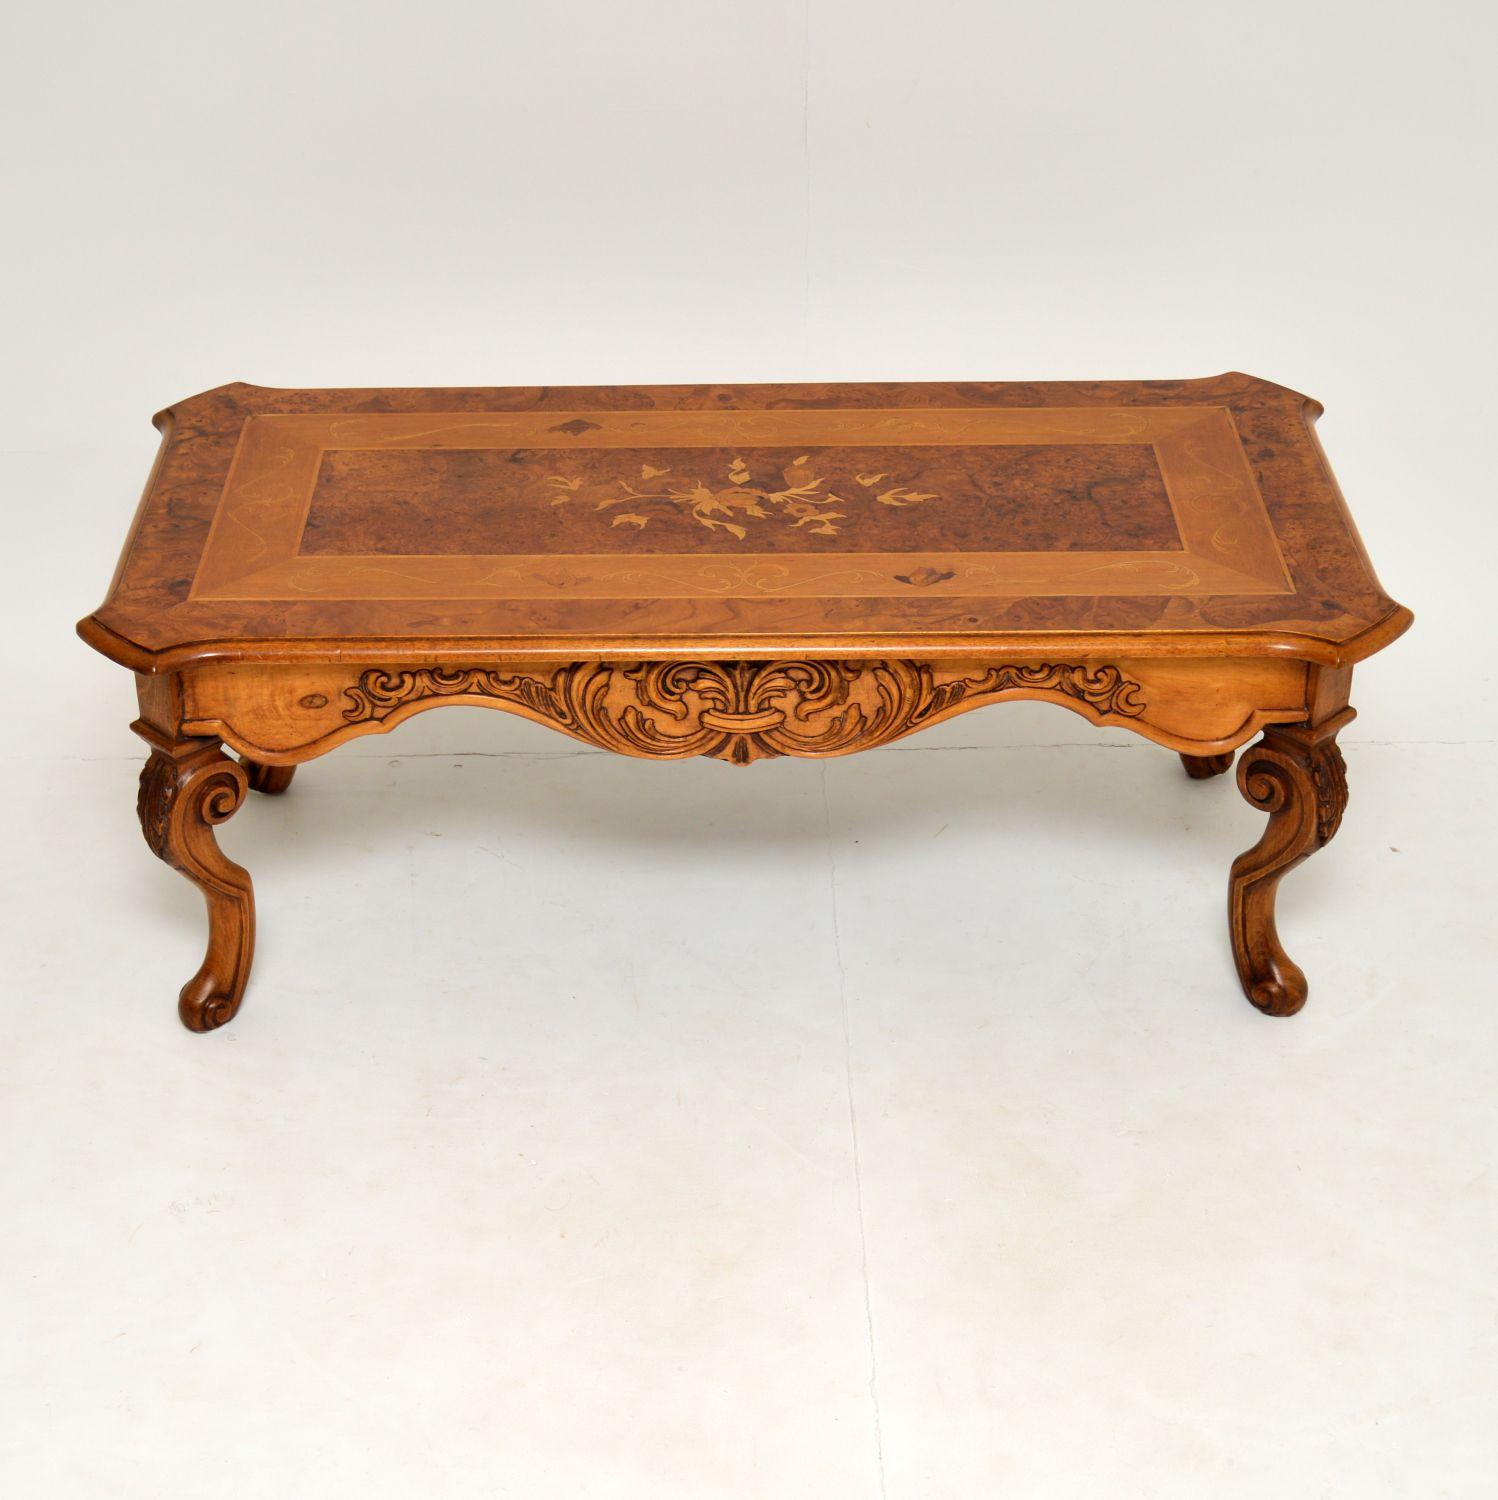 A stunning and large coffee table in the antique French style. This dates from circa 1950s.

It is of amazing quality and has impressive detail throughout. There is beautiful carving on the sides and the legs, this has a gorgeous overall shape.